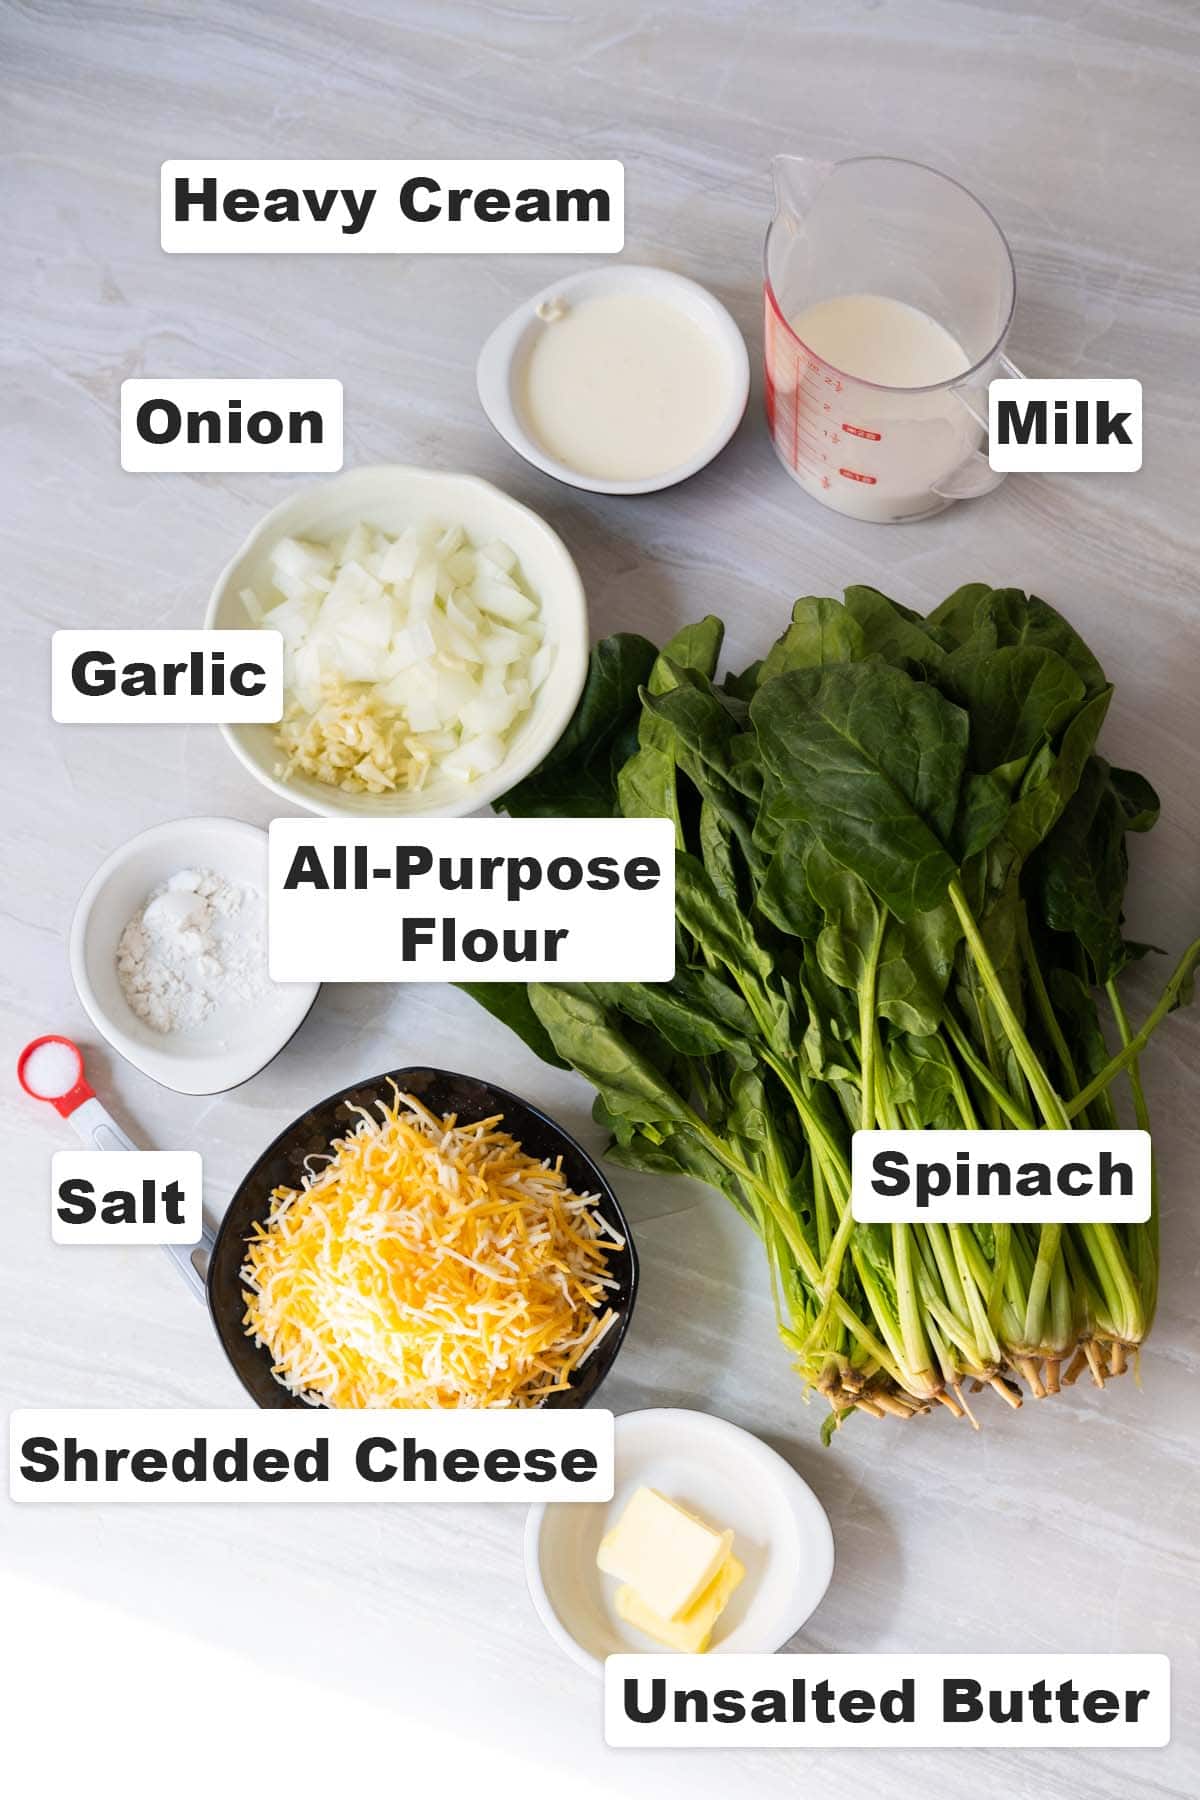 All ingredients placed on a table for creamed spinach recipe